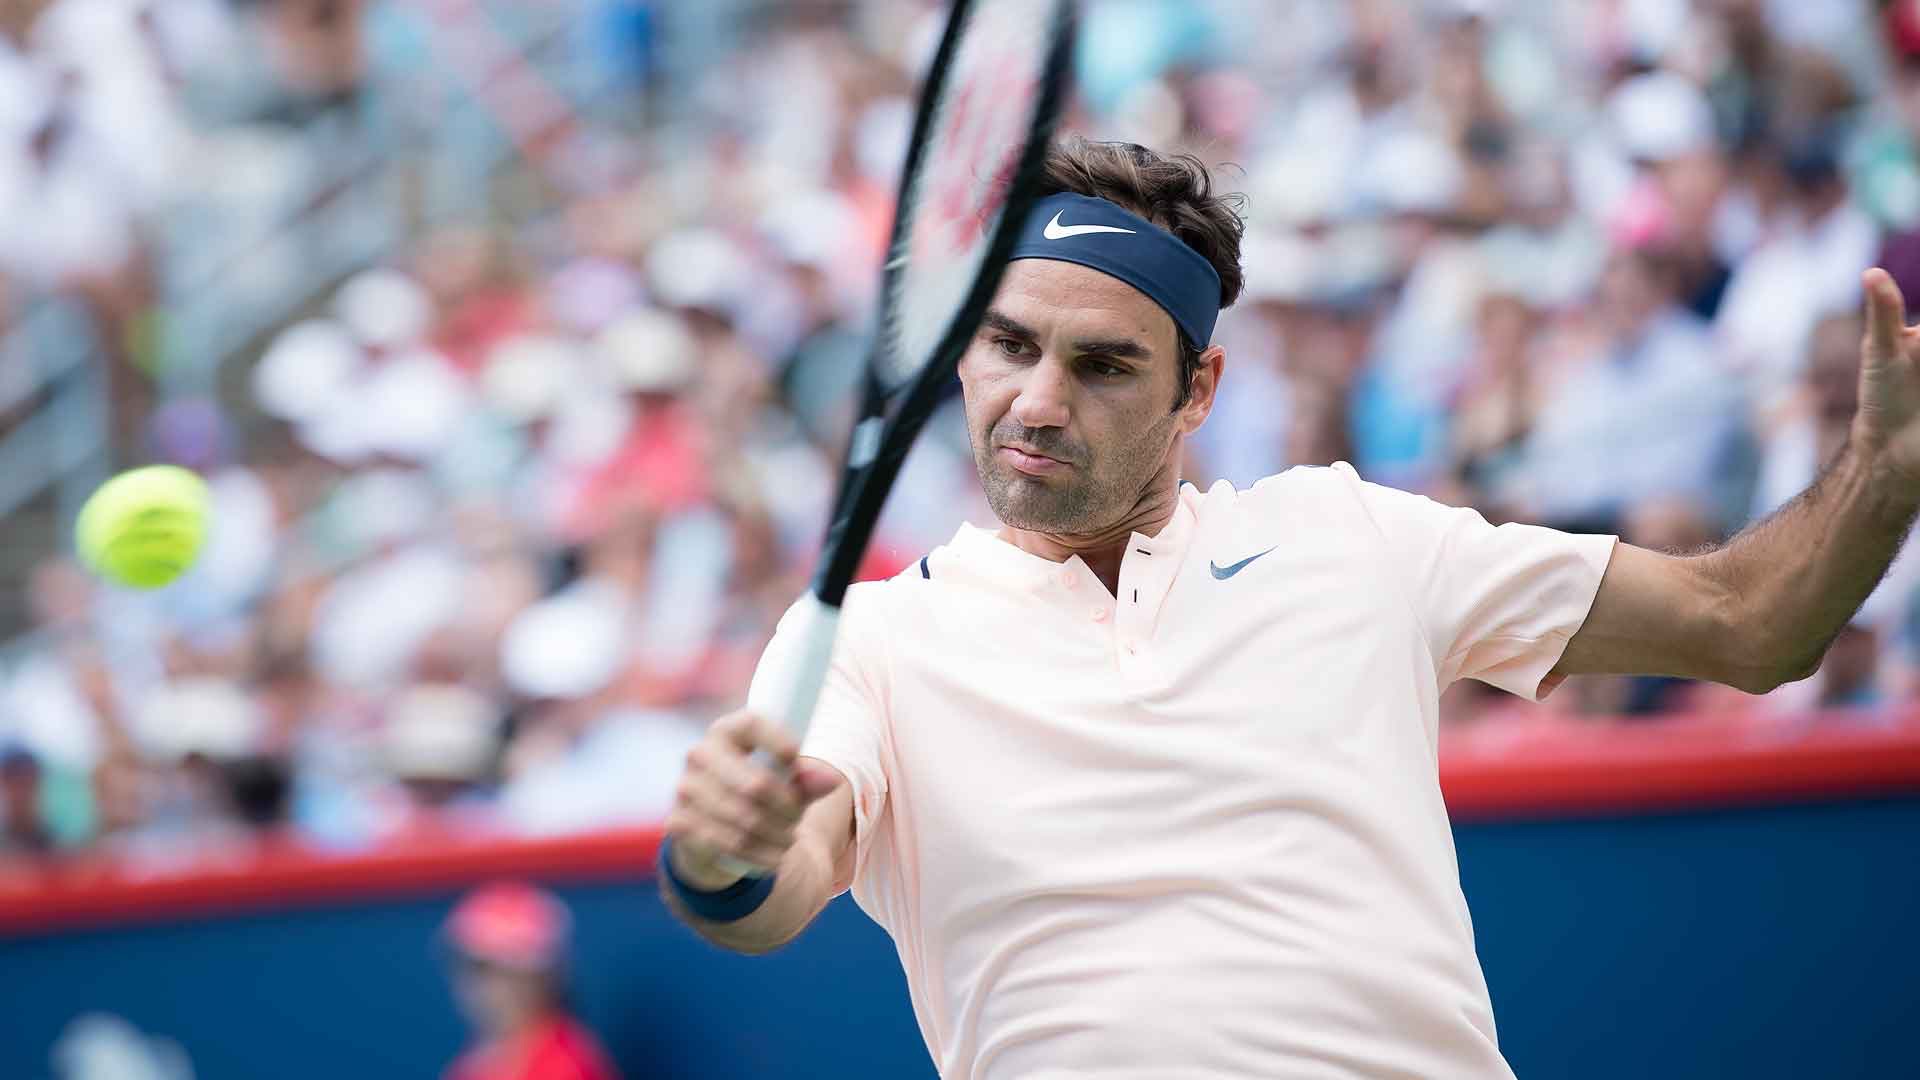 Roger Federer 2017 Coupe Rogers (Montreal Masters)